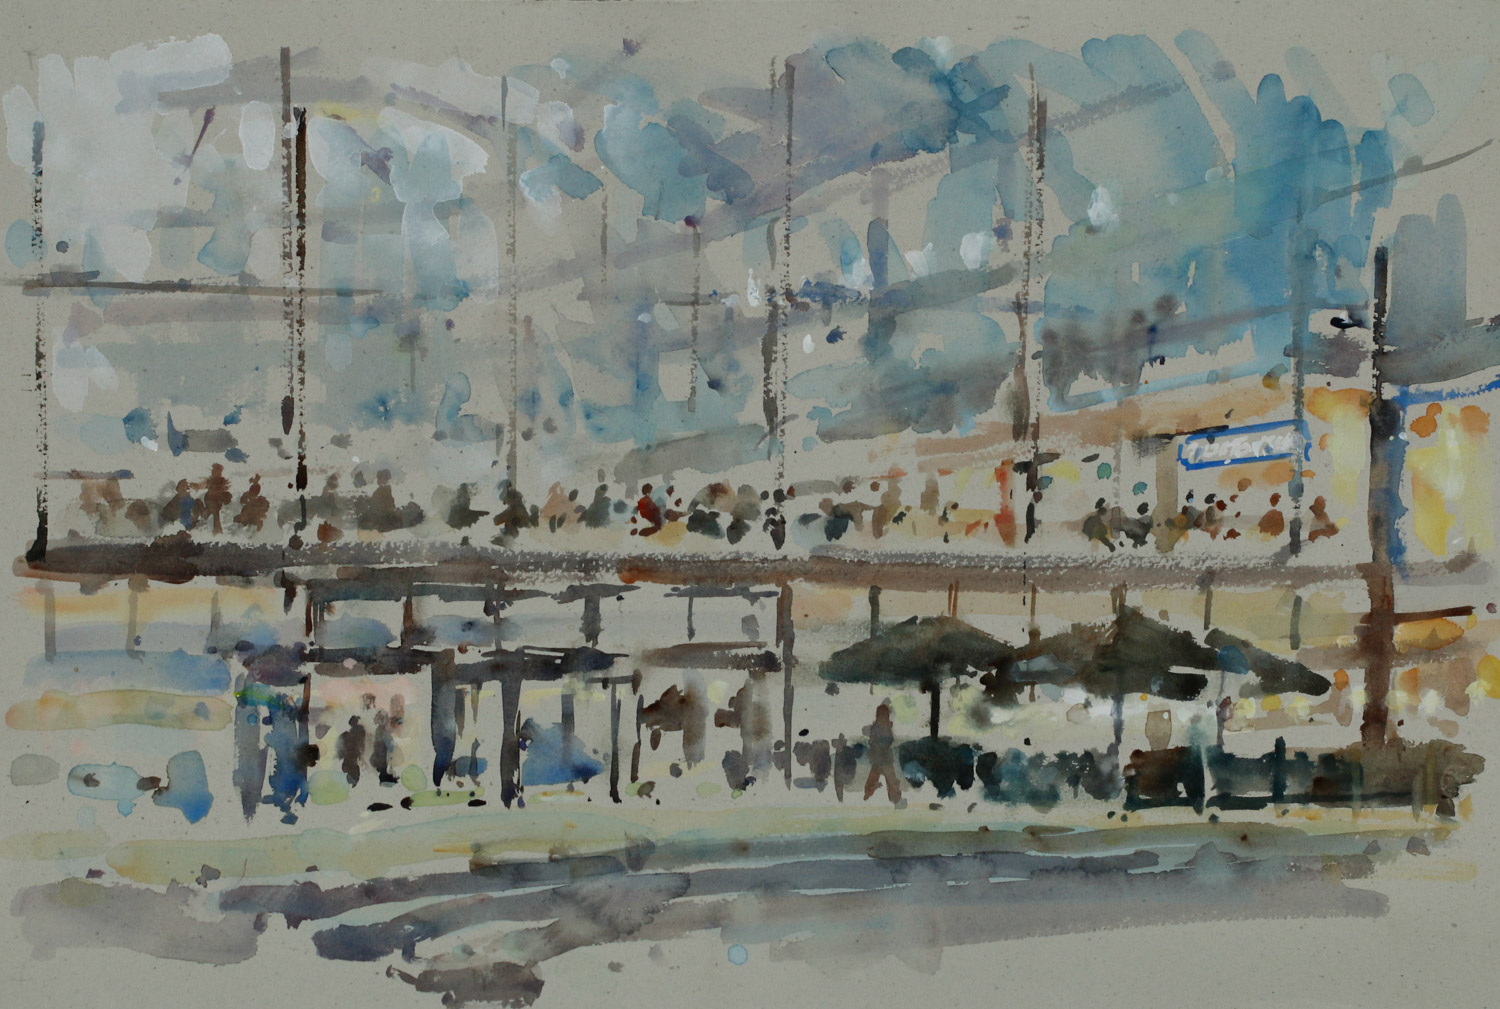 Artist-Andrew-Horrod-The-Forum-£425-12x20-Watercolour-on-Paper-at-Paint-Out-Norwich-2015-photo-by-Mark-Ivan-Benfield-6316-1